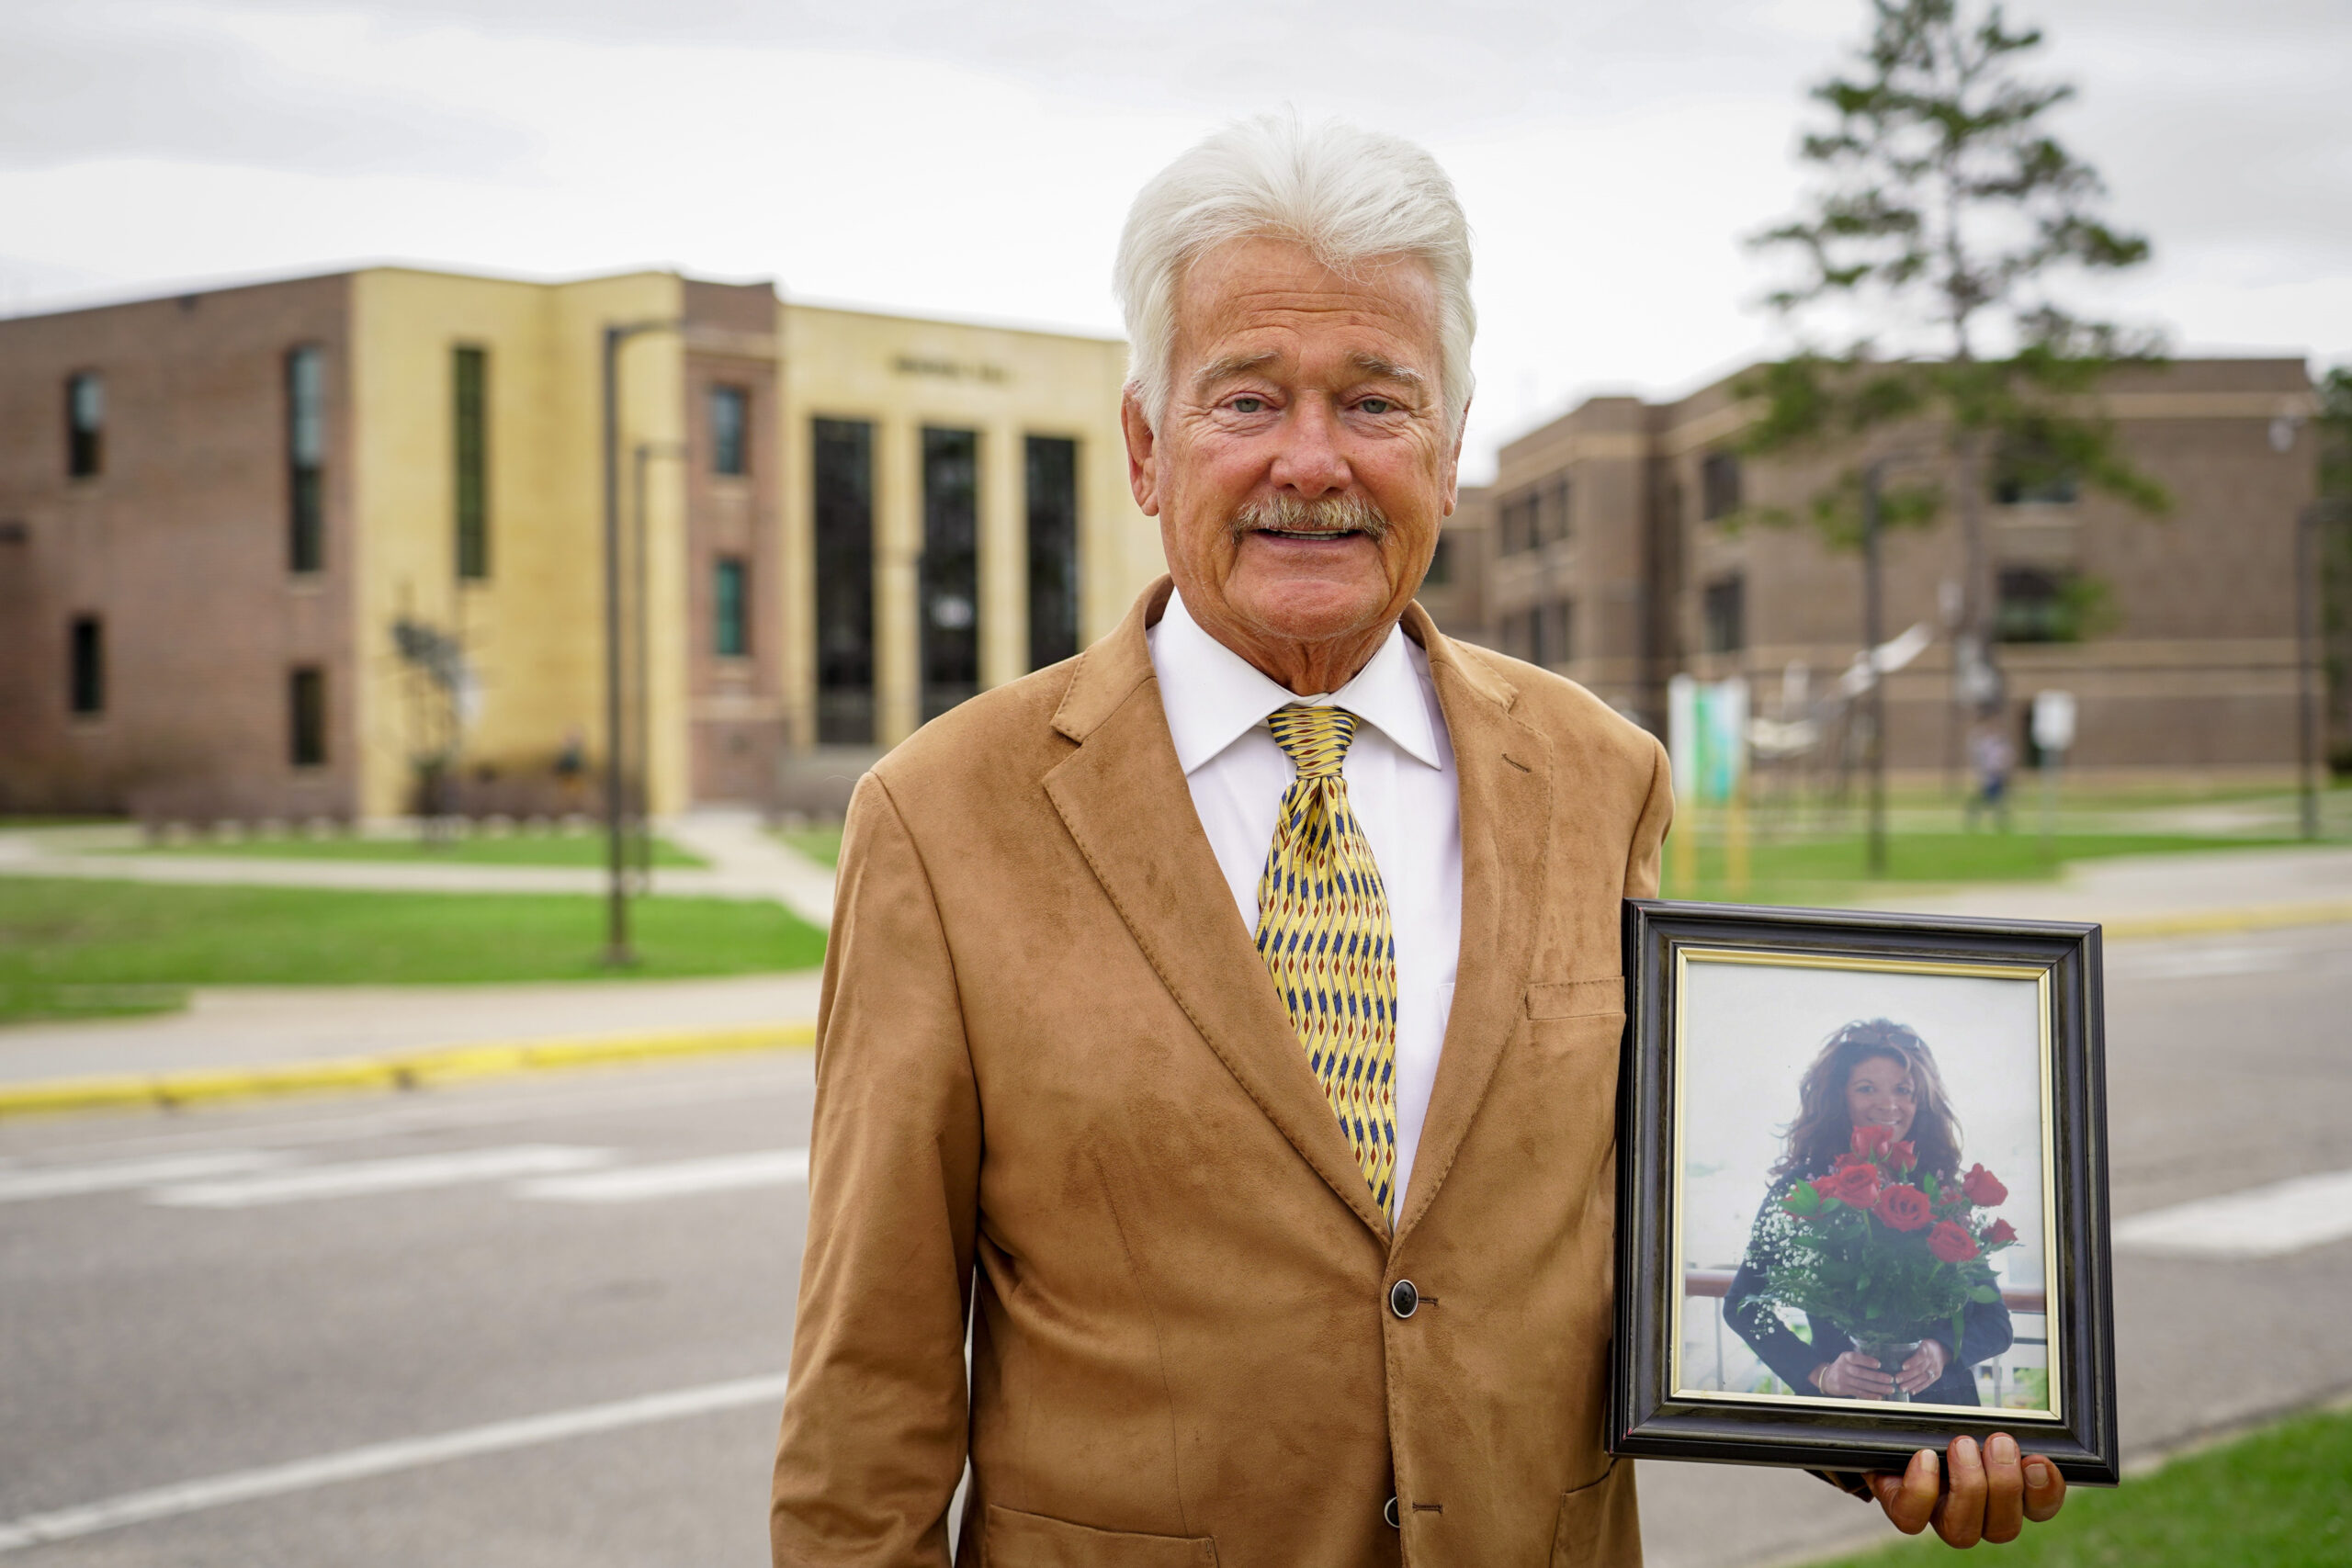 In honor of his late wife, Keith Johanneson has pledged a $1 million gift to endow nursing scholarships at Bemidji State University. (Micah Friez / Bemidji State)